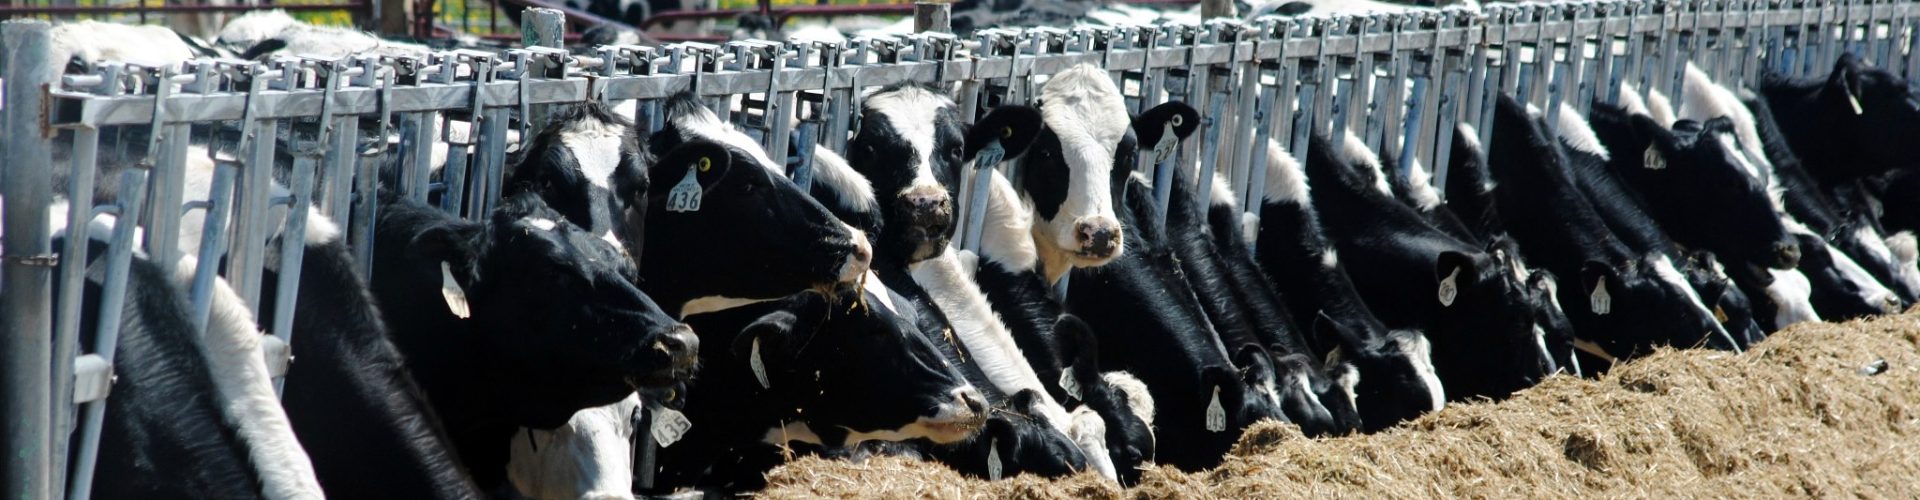 Horizontal photo of dairy cows with their heads peaking out through the metal feeder